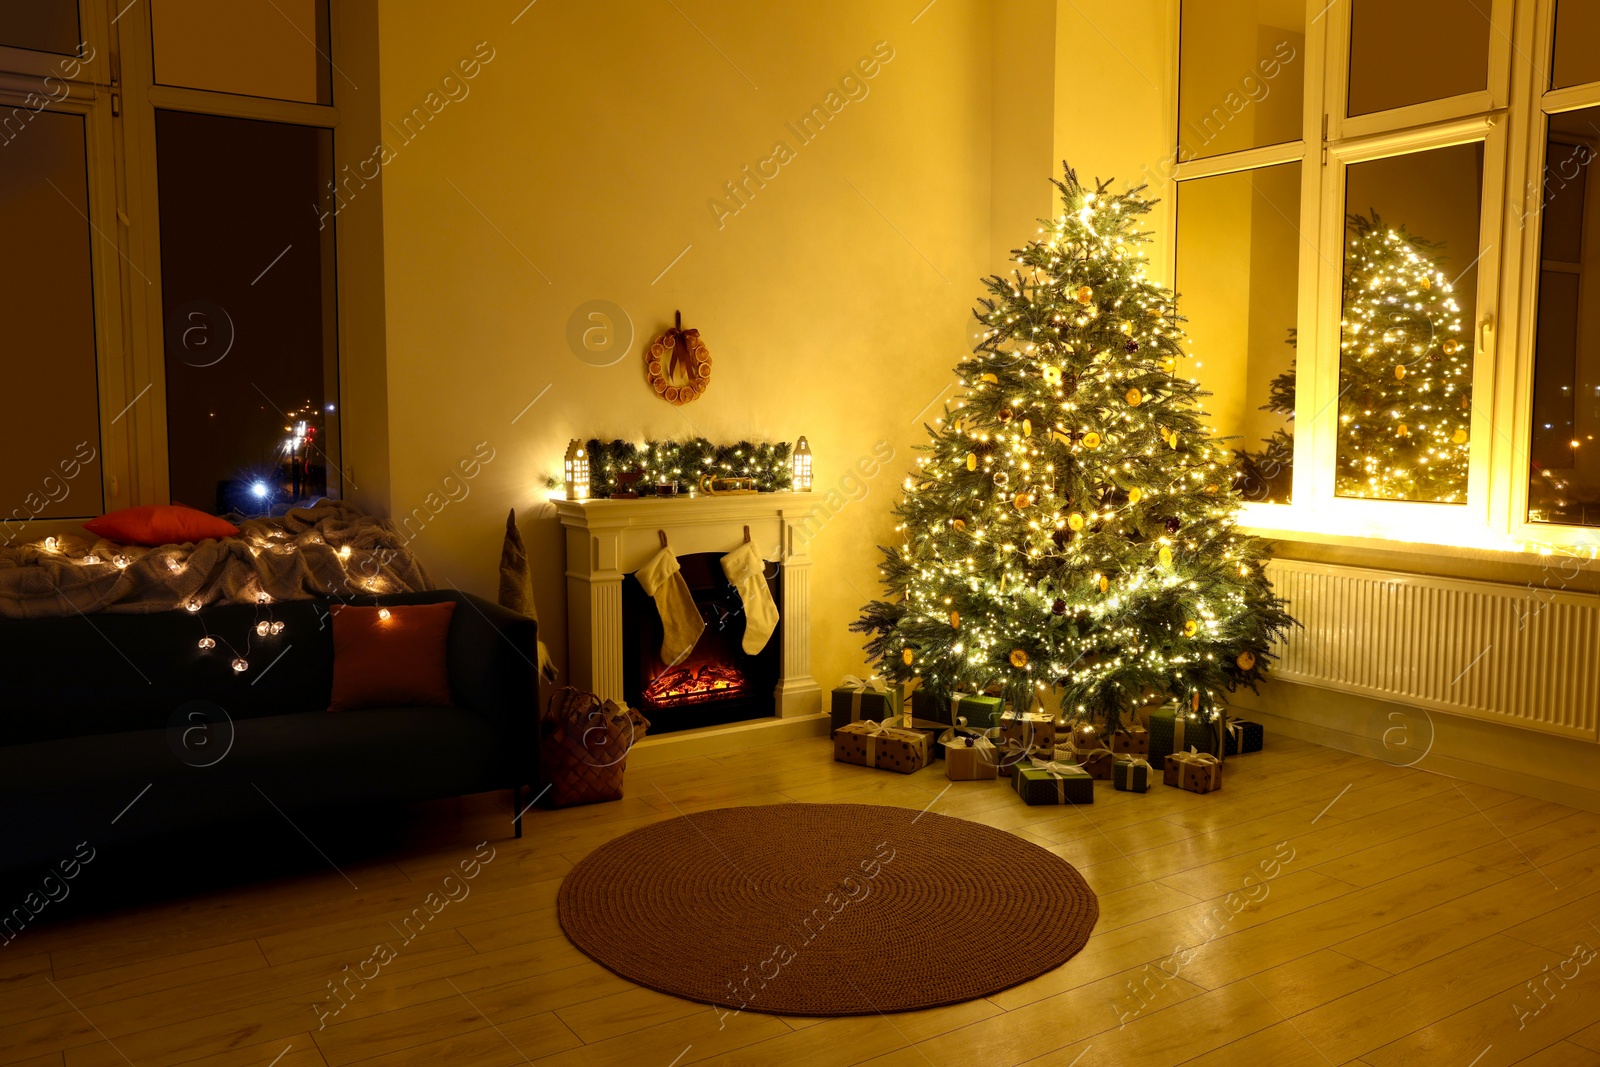 Photo of Stylish fireplace near Christmas tree, sofa and accessories in cosy room